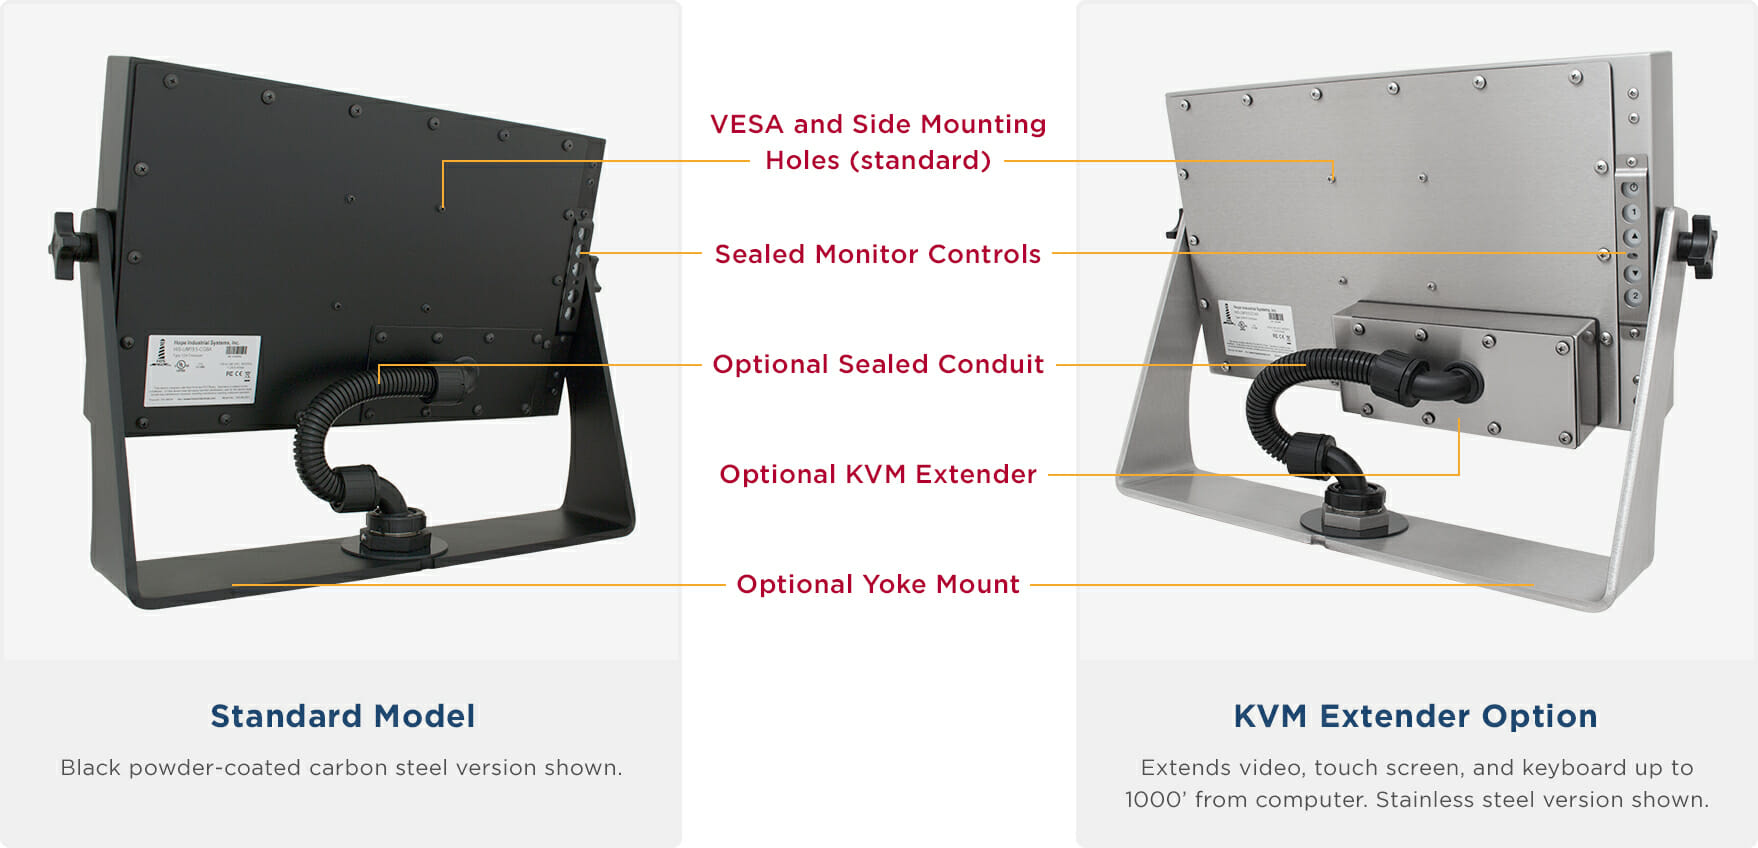 Rear views of NEMA 4/4X Rated Widescreen 19.5" Universal Mount Monitors showing Industrial Enclosure features and options